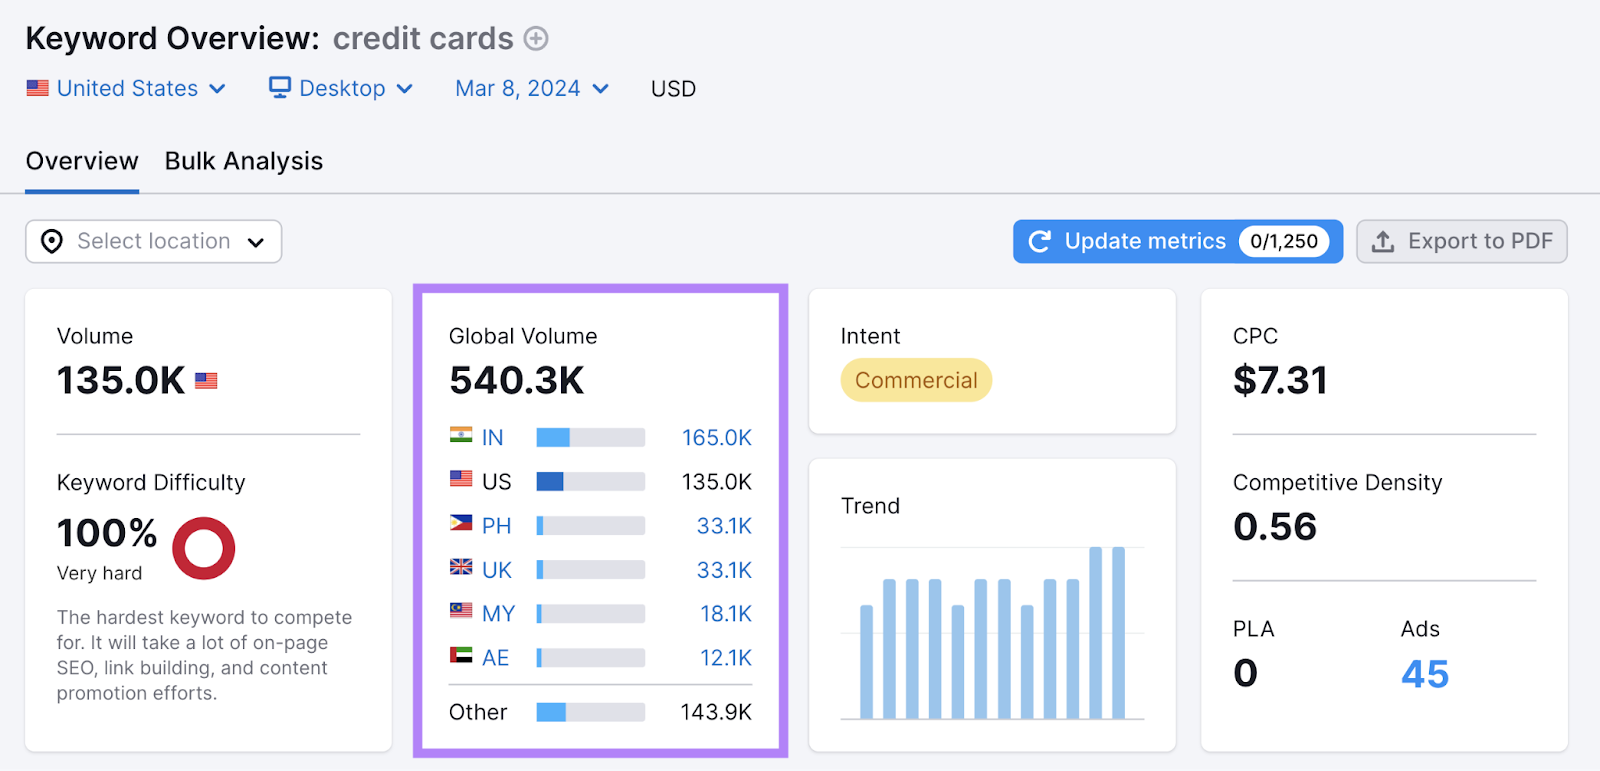 Global volume metric for "credit cards" shown in Keyword Overview